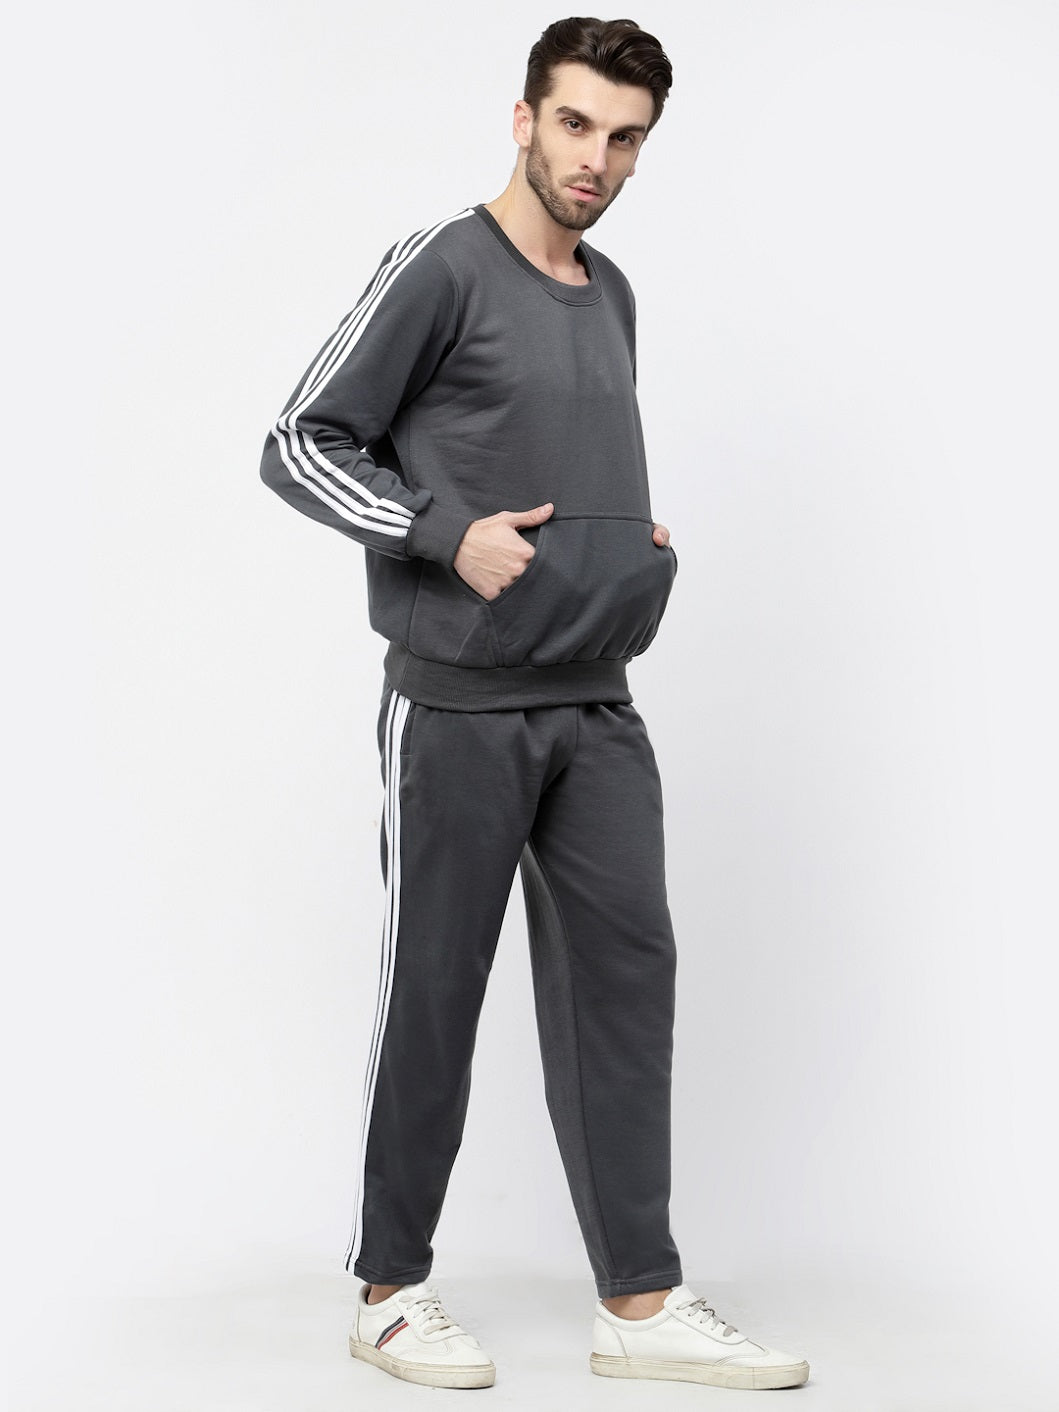 Men's Athletic Gym Running Sports Track Suit